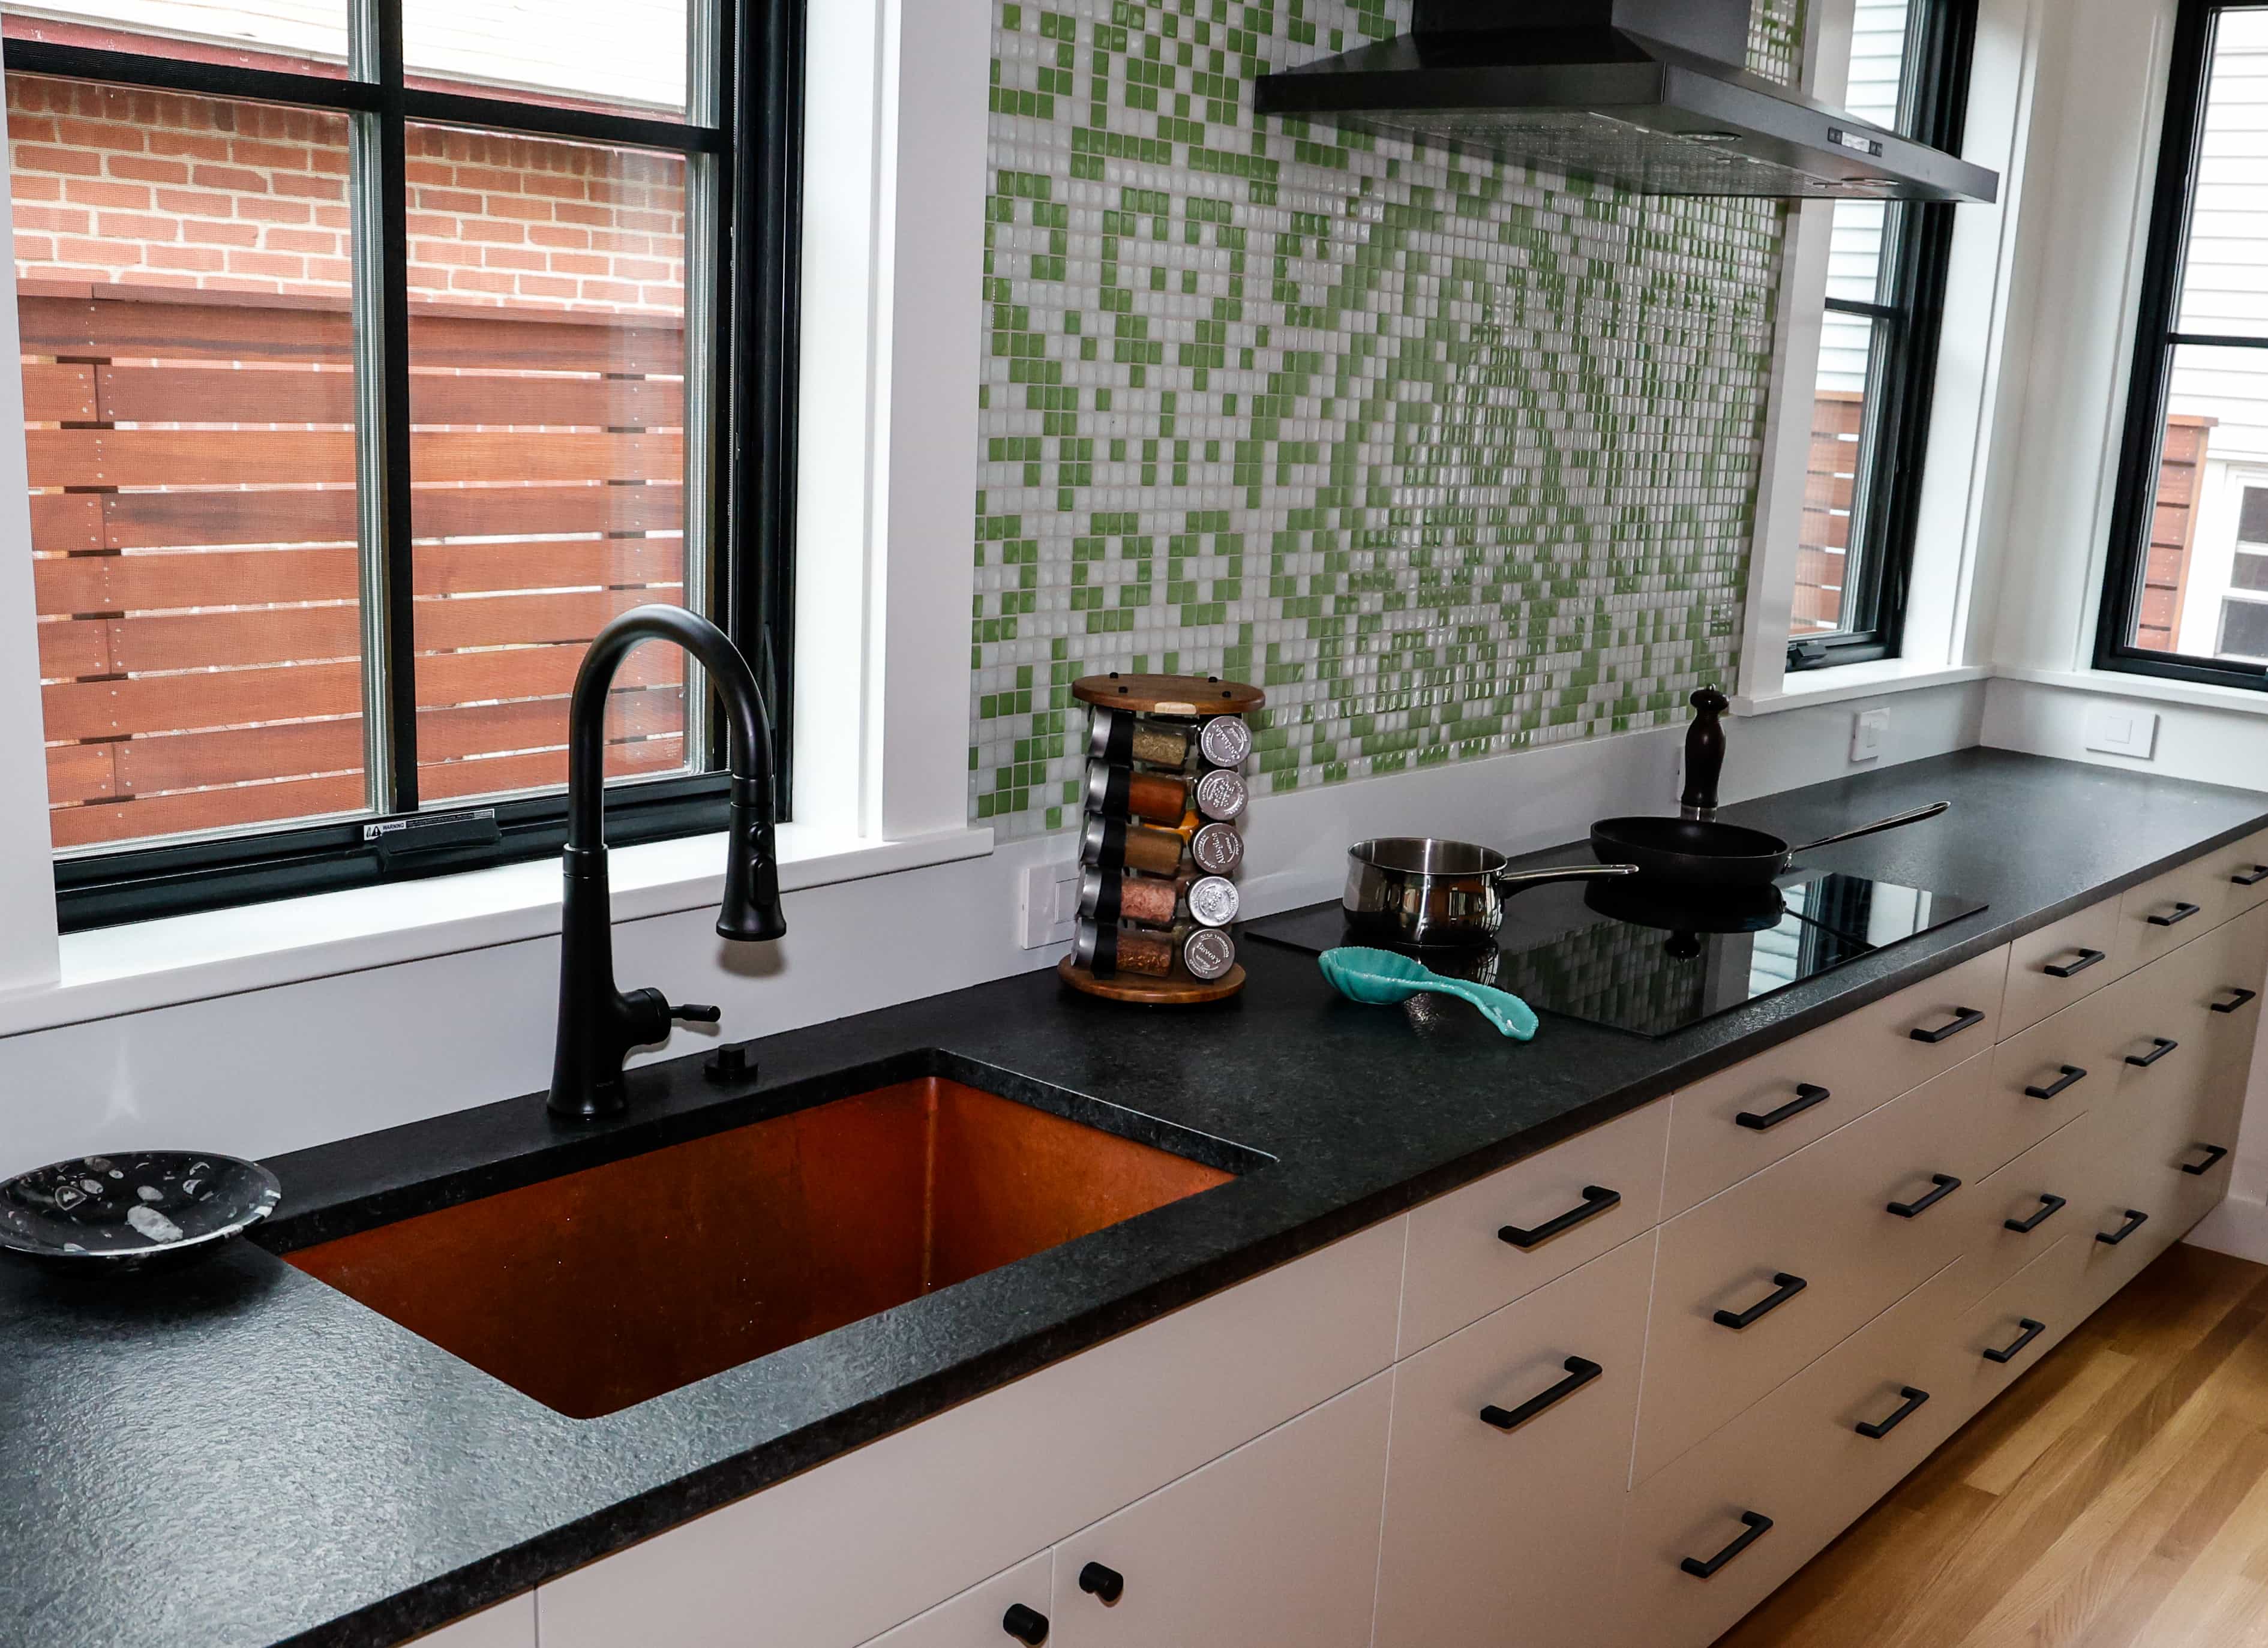 CopperSmith Undermount SB Weathered Copper Sink  in a contemporary kitchen with black countertops white cabinets and green and white tile backsplash